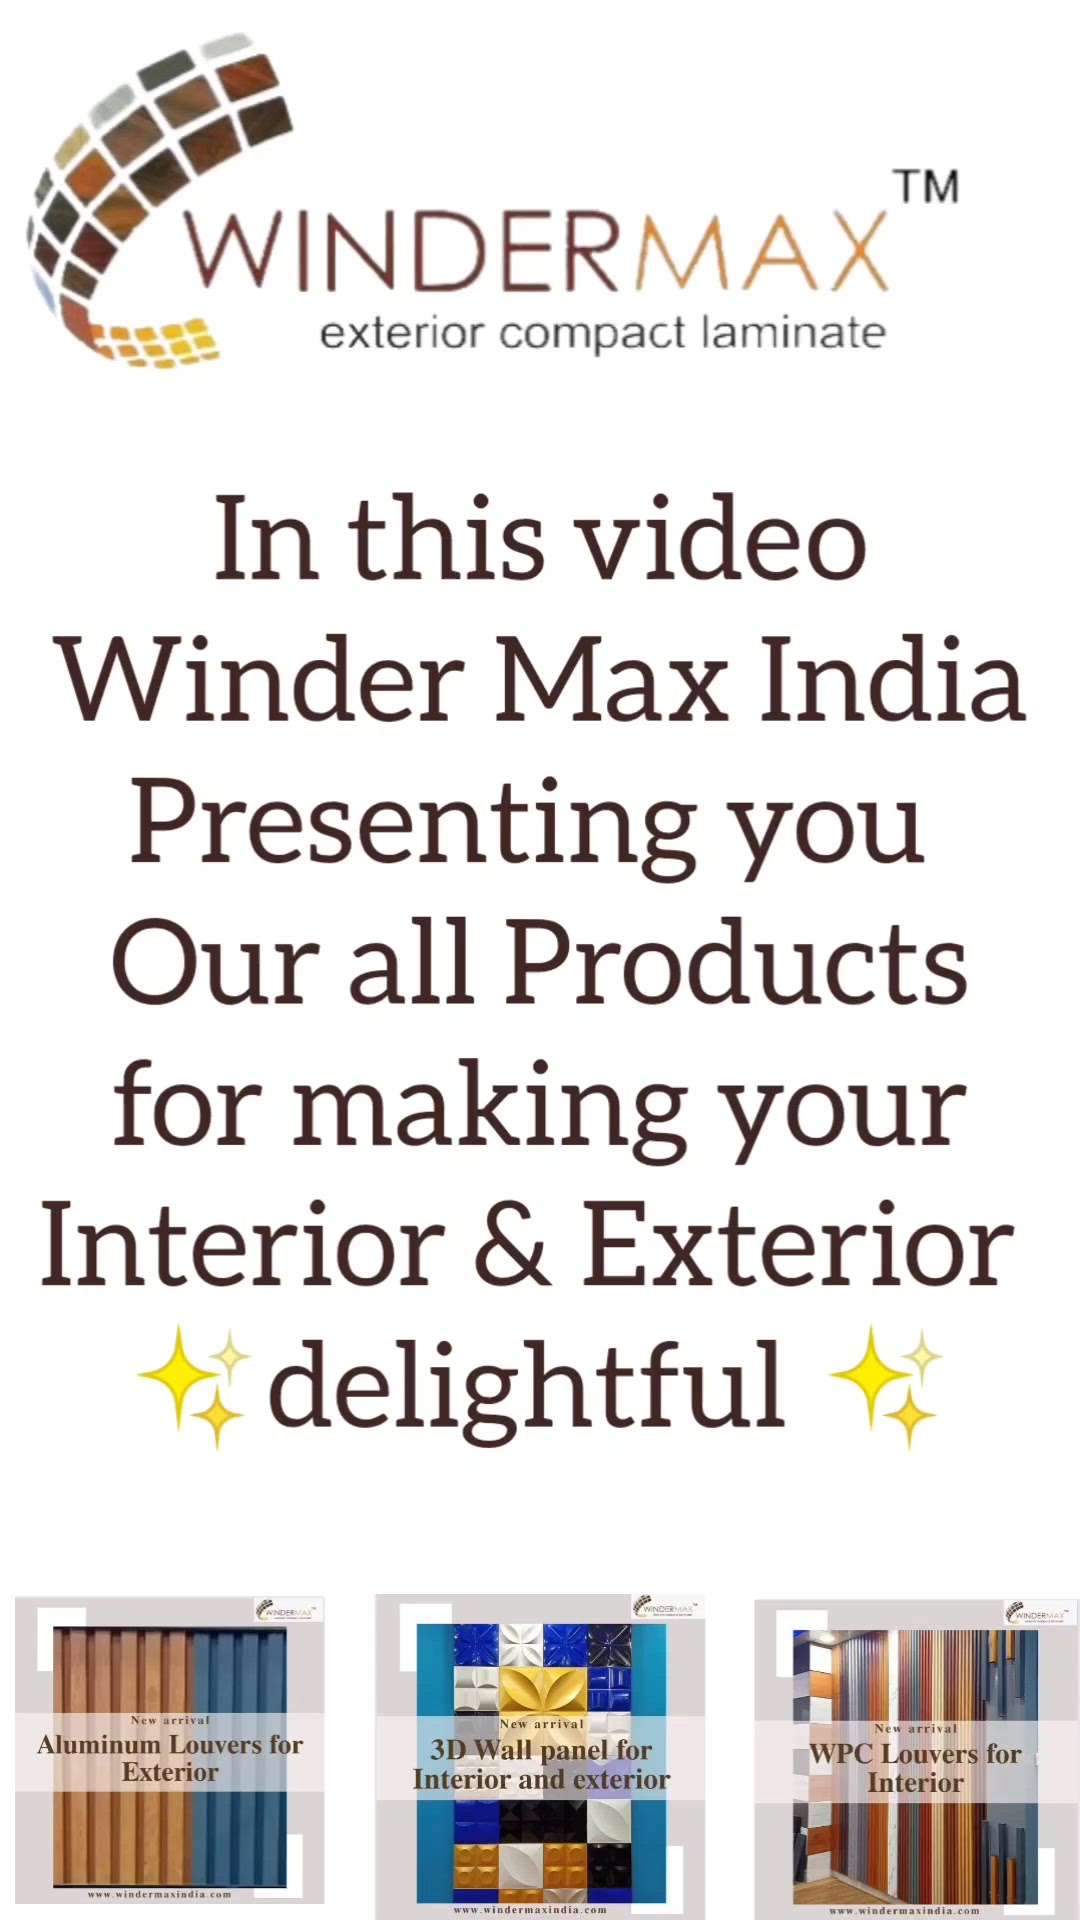 In video Winder Max India Presenting you all type of Exterior & Interior elevation product 
.
Exclusive Range of Beautiful trendy louvers for wall panelling 😍😍
.
#elevation #architecture #design #interiordesign #construction #elevationdesign #architect #love #interiorlouvers  #exteriordesign #motivation #art #architecturedesign #fundermax #interior #exterior #hplsheet #interiordesigner #elevations #drawing #frontelevation #architecturelovers #home #facade #louvers #exteriorelevation #homedecor 
. 
. 
For more details our all products kindly visit our website
www.windermaxindia.com
www.indiamake.co.in
Info@windermaxindia.com
Or call us on
8882291670 9810980278

Regards
Windermax India